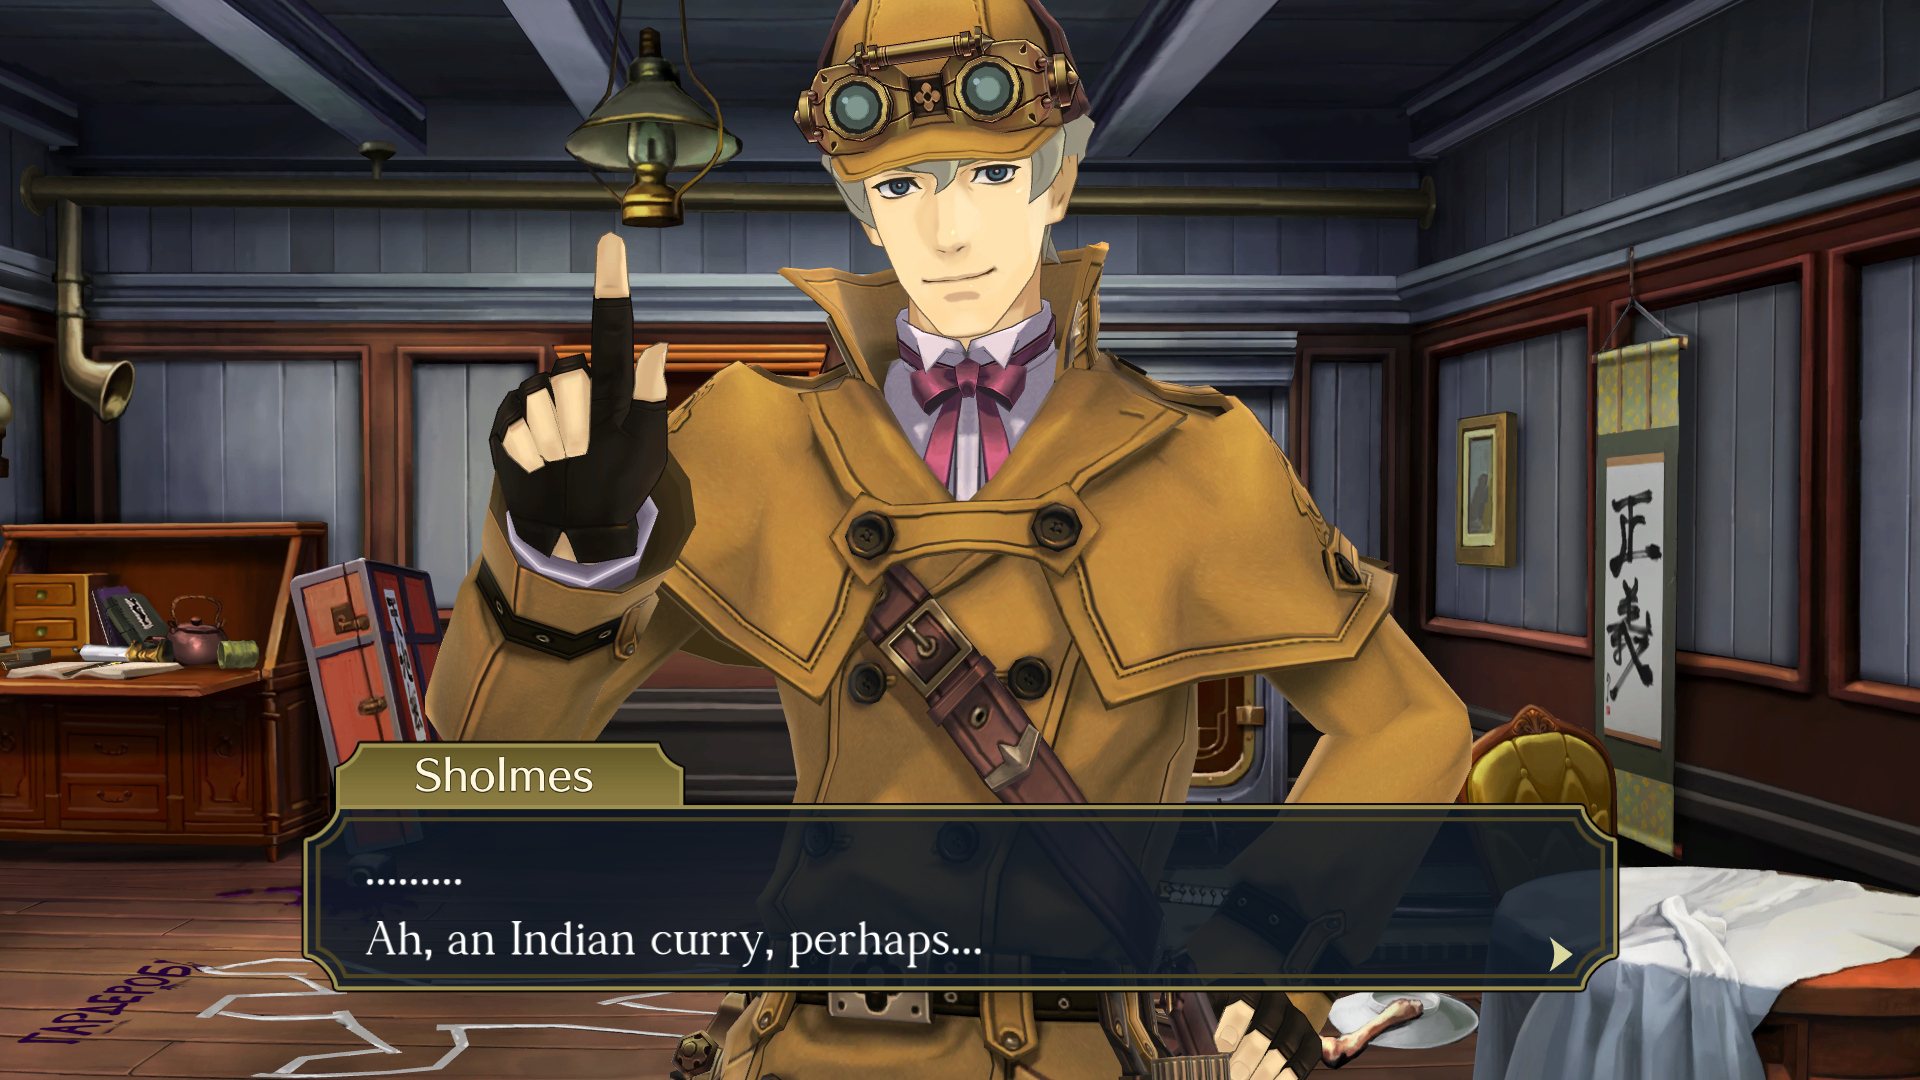 The Great Ace Attorney Chronicles - Sholmes says: "... Ah, an Indian curry, perhaps..."